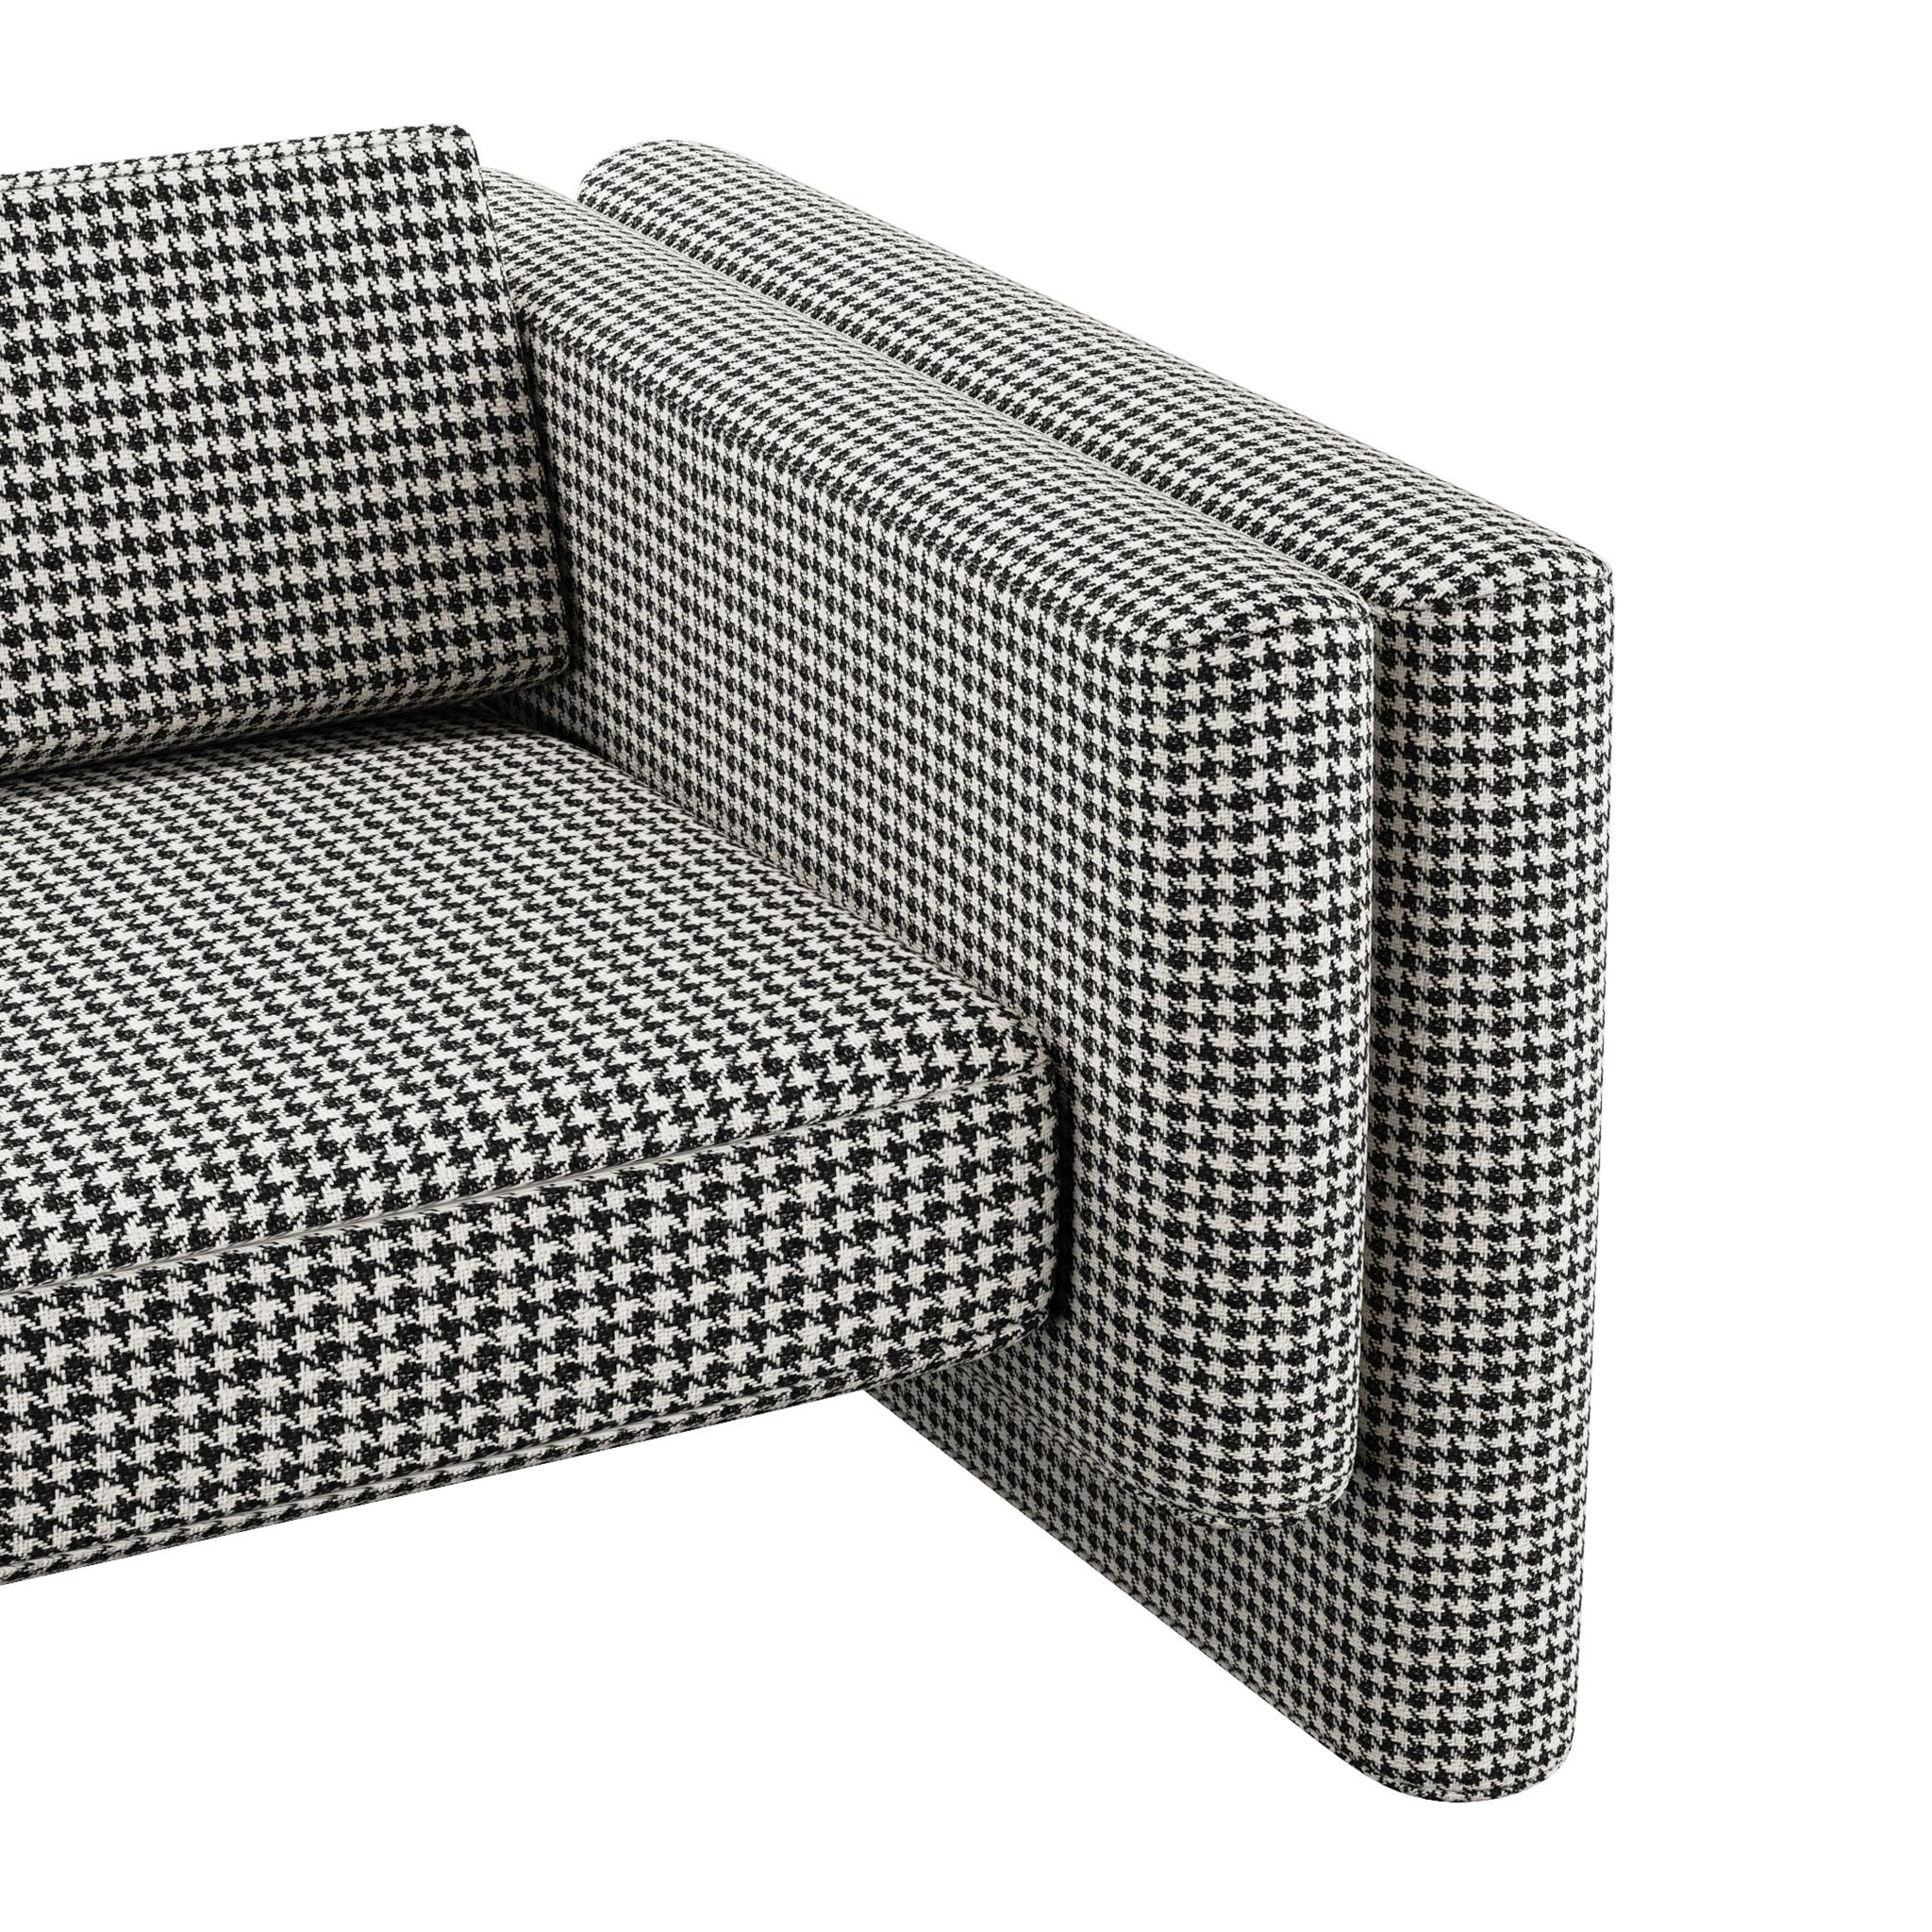 Hand-Crafted Contemporary IMiniml Sofa in Retro Black & White Patterned  For Sale